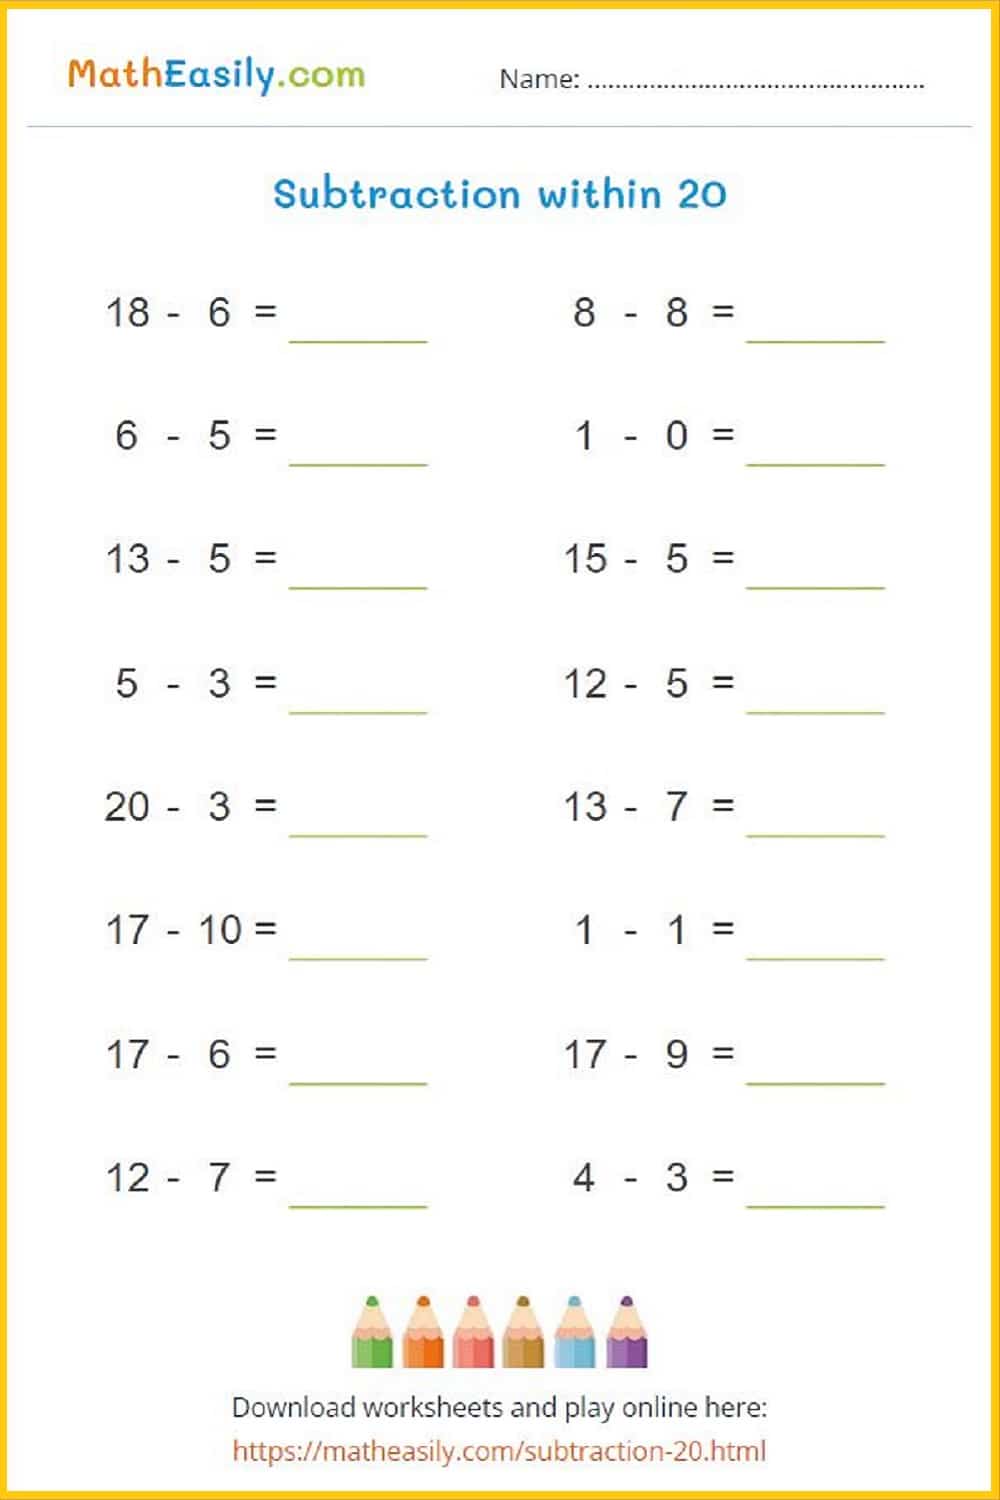 first grade subtraction worksheets: Free worksheets grade 1 math.
1st grade math worksheets subtraction.